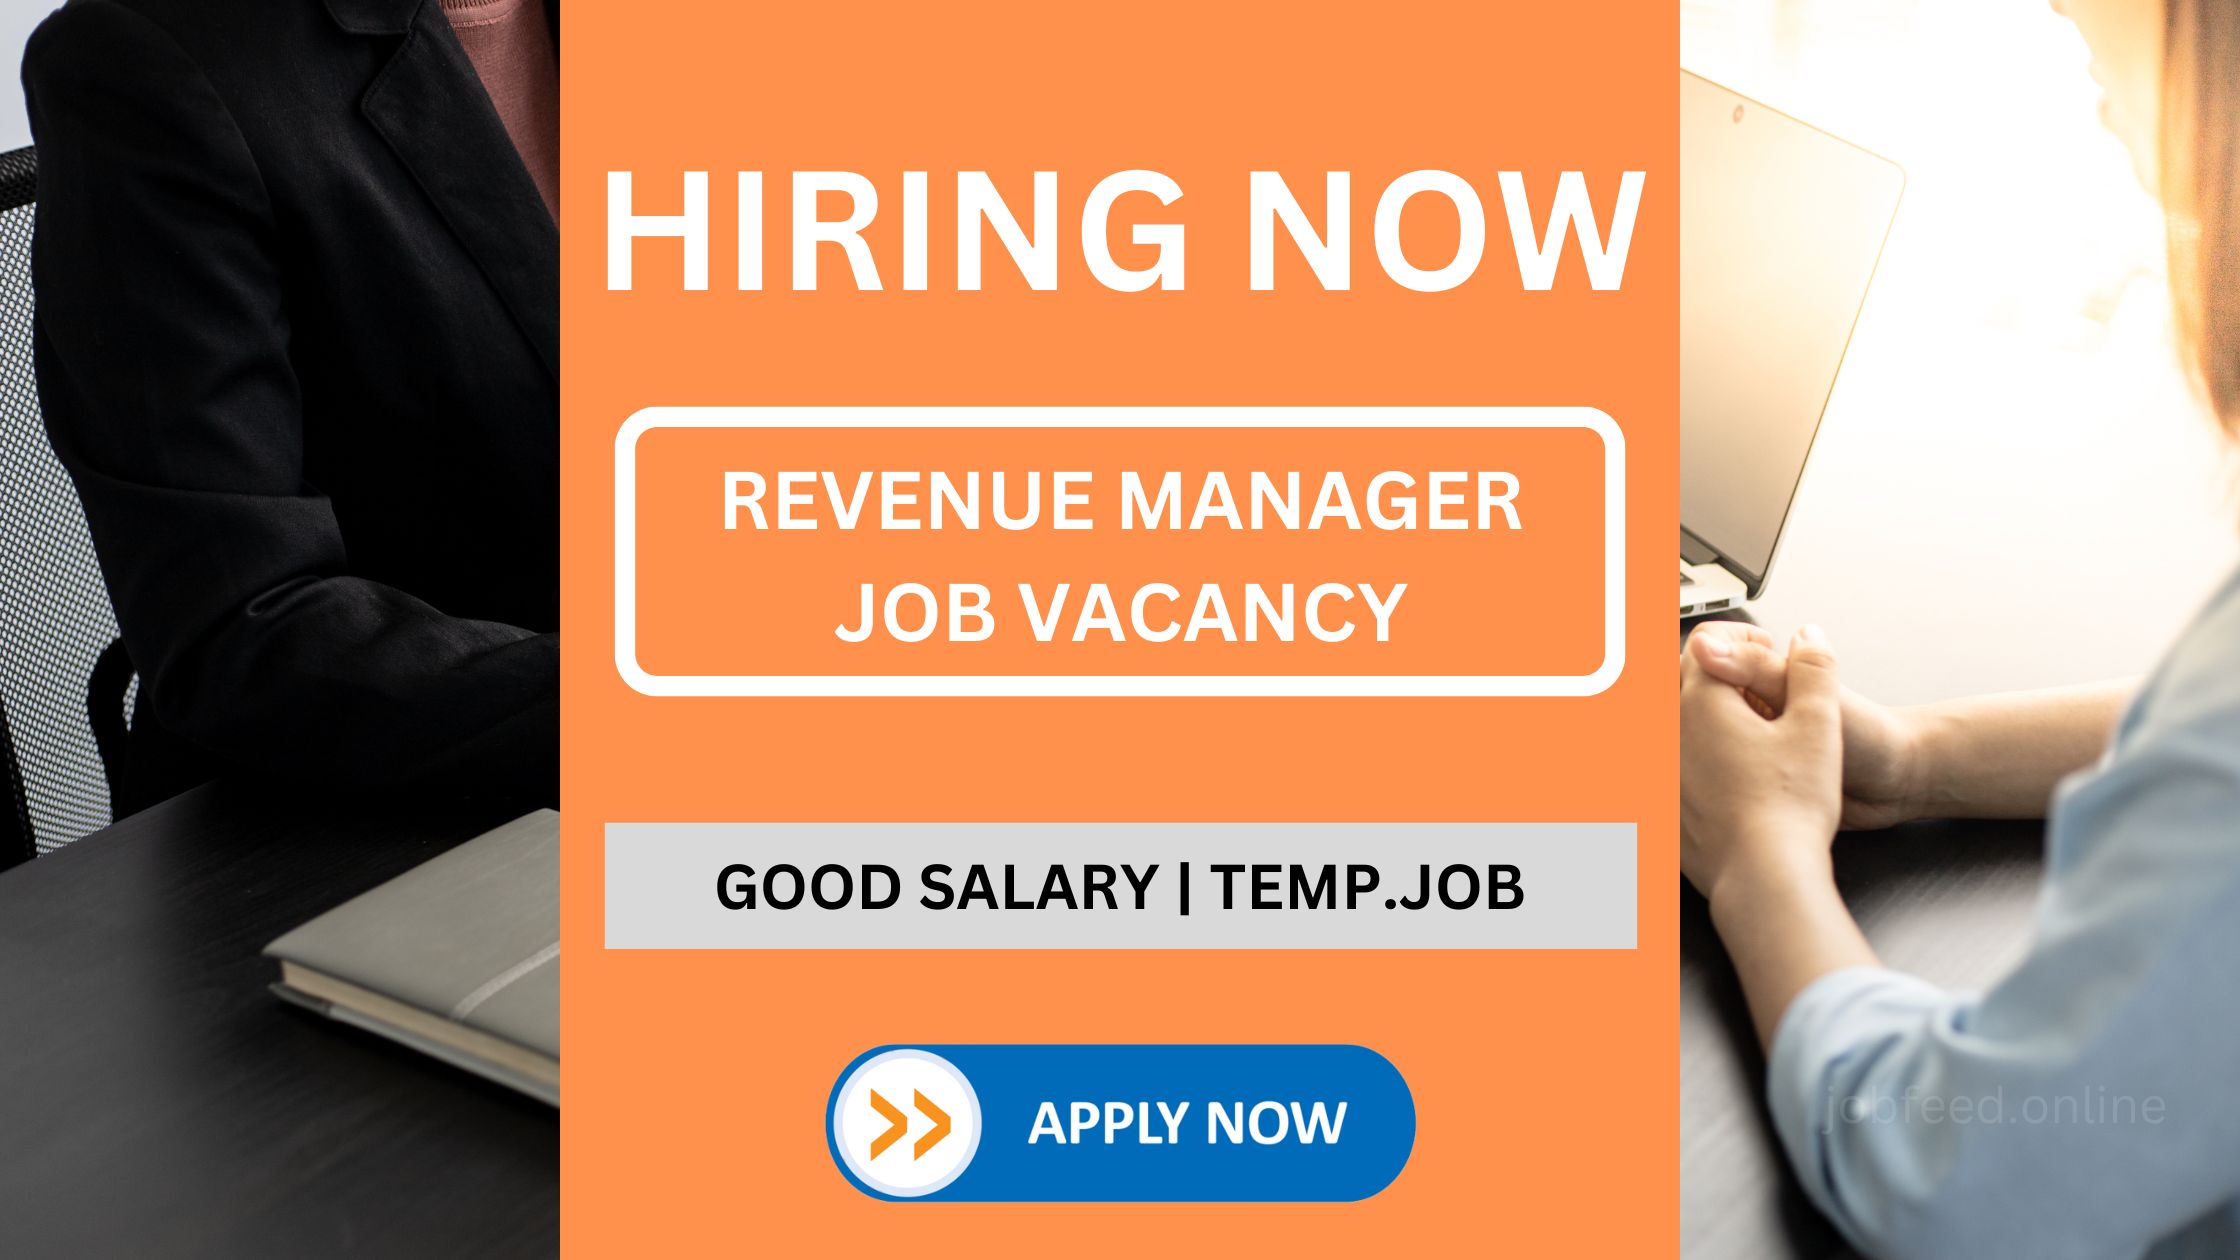 Revenue Manager Job Vacancy - 5 Years of Experience is Mandatory